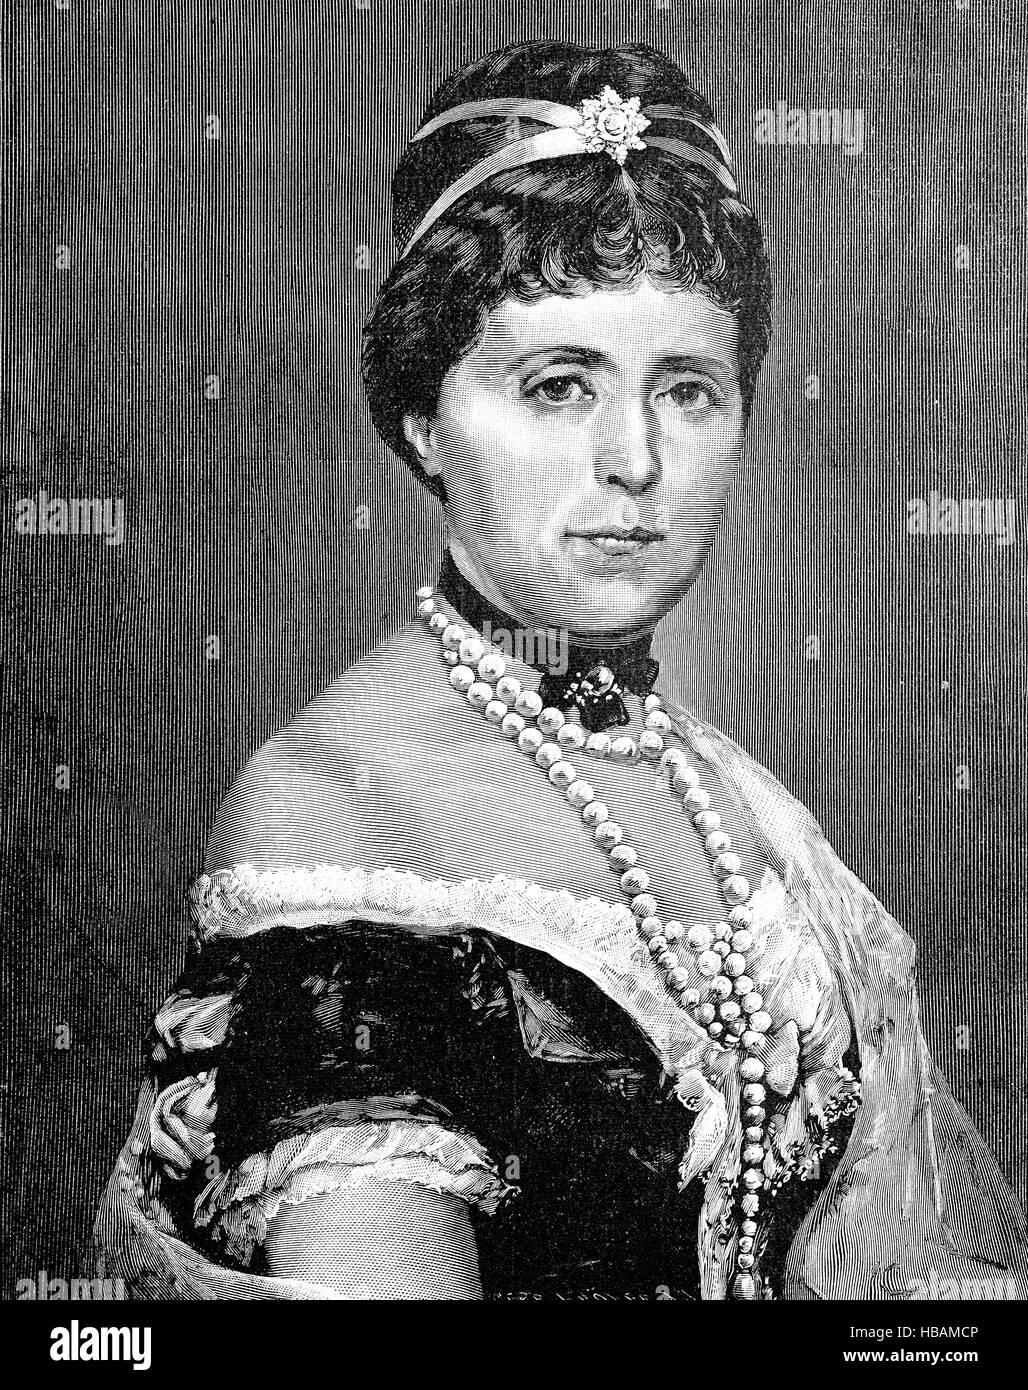 Princess Augusta of Saxe-Weimar-Eisenach, Augusta Marie Luise Katharina, 30 September 1811 - 7 January 1890, was the Queen of Prussia and the first German Empress, hictorical illustration from 1880 Stock Photo